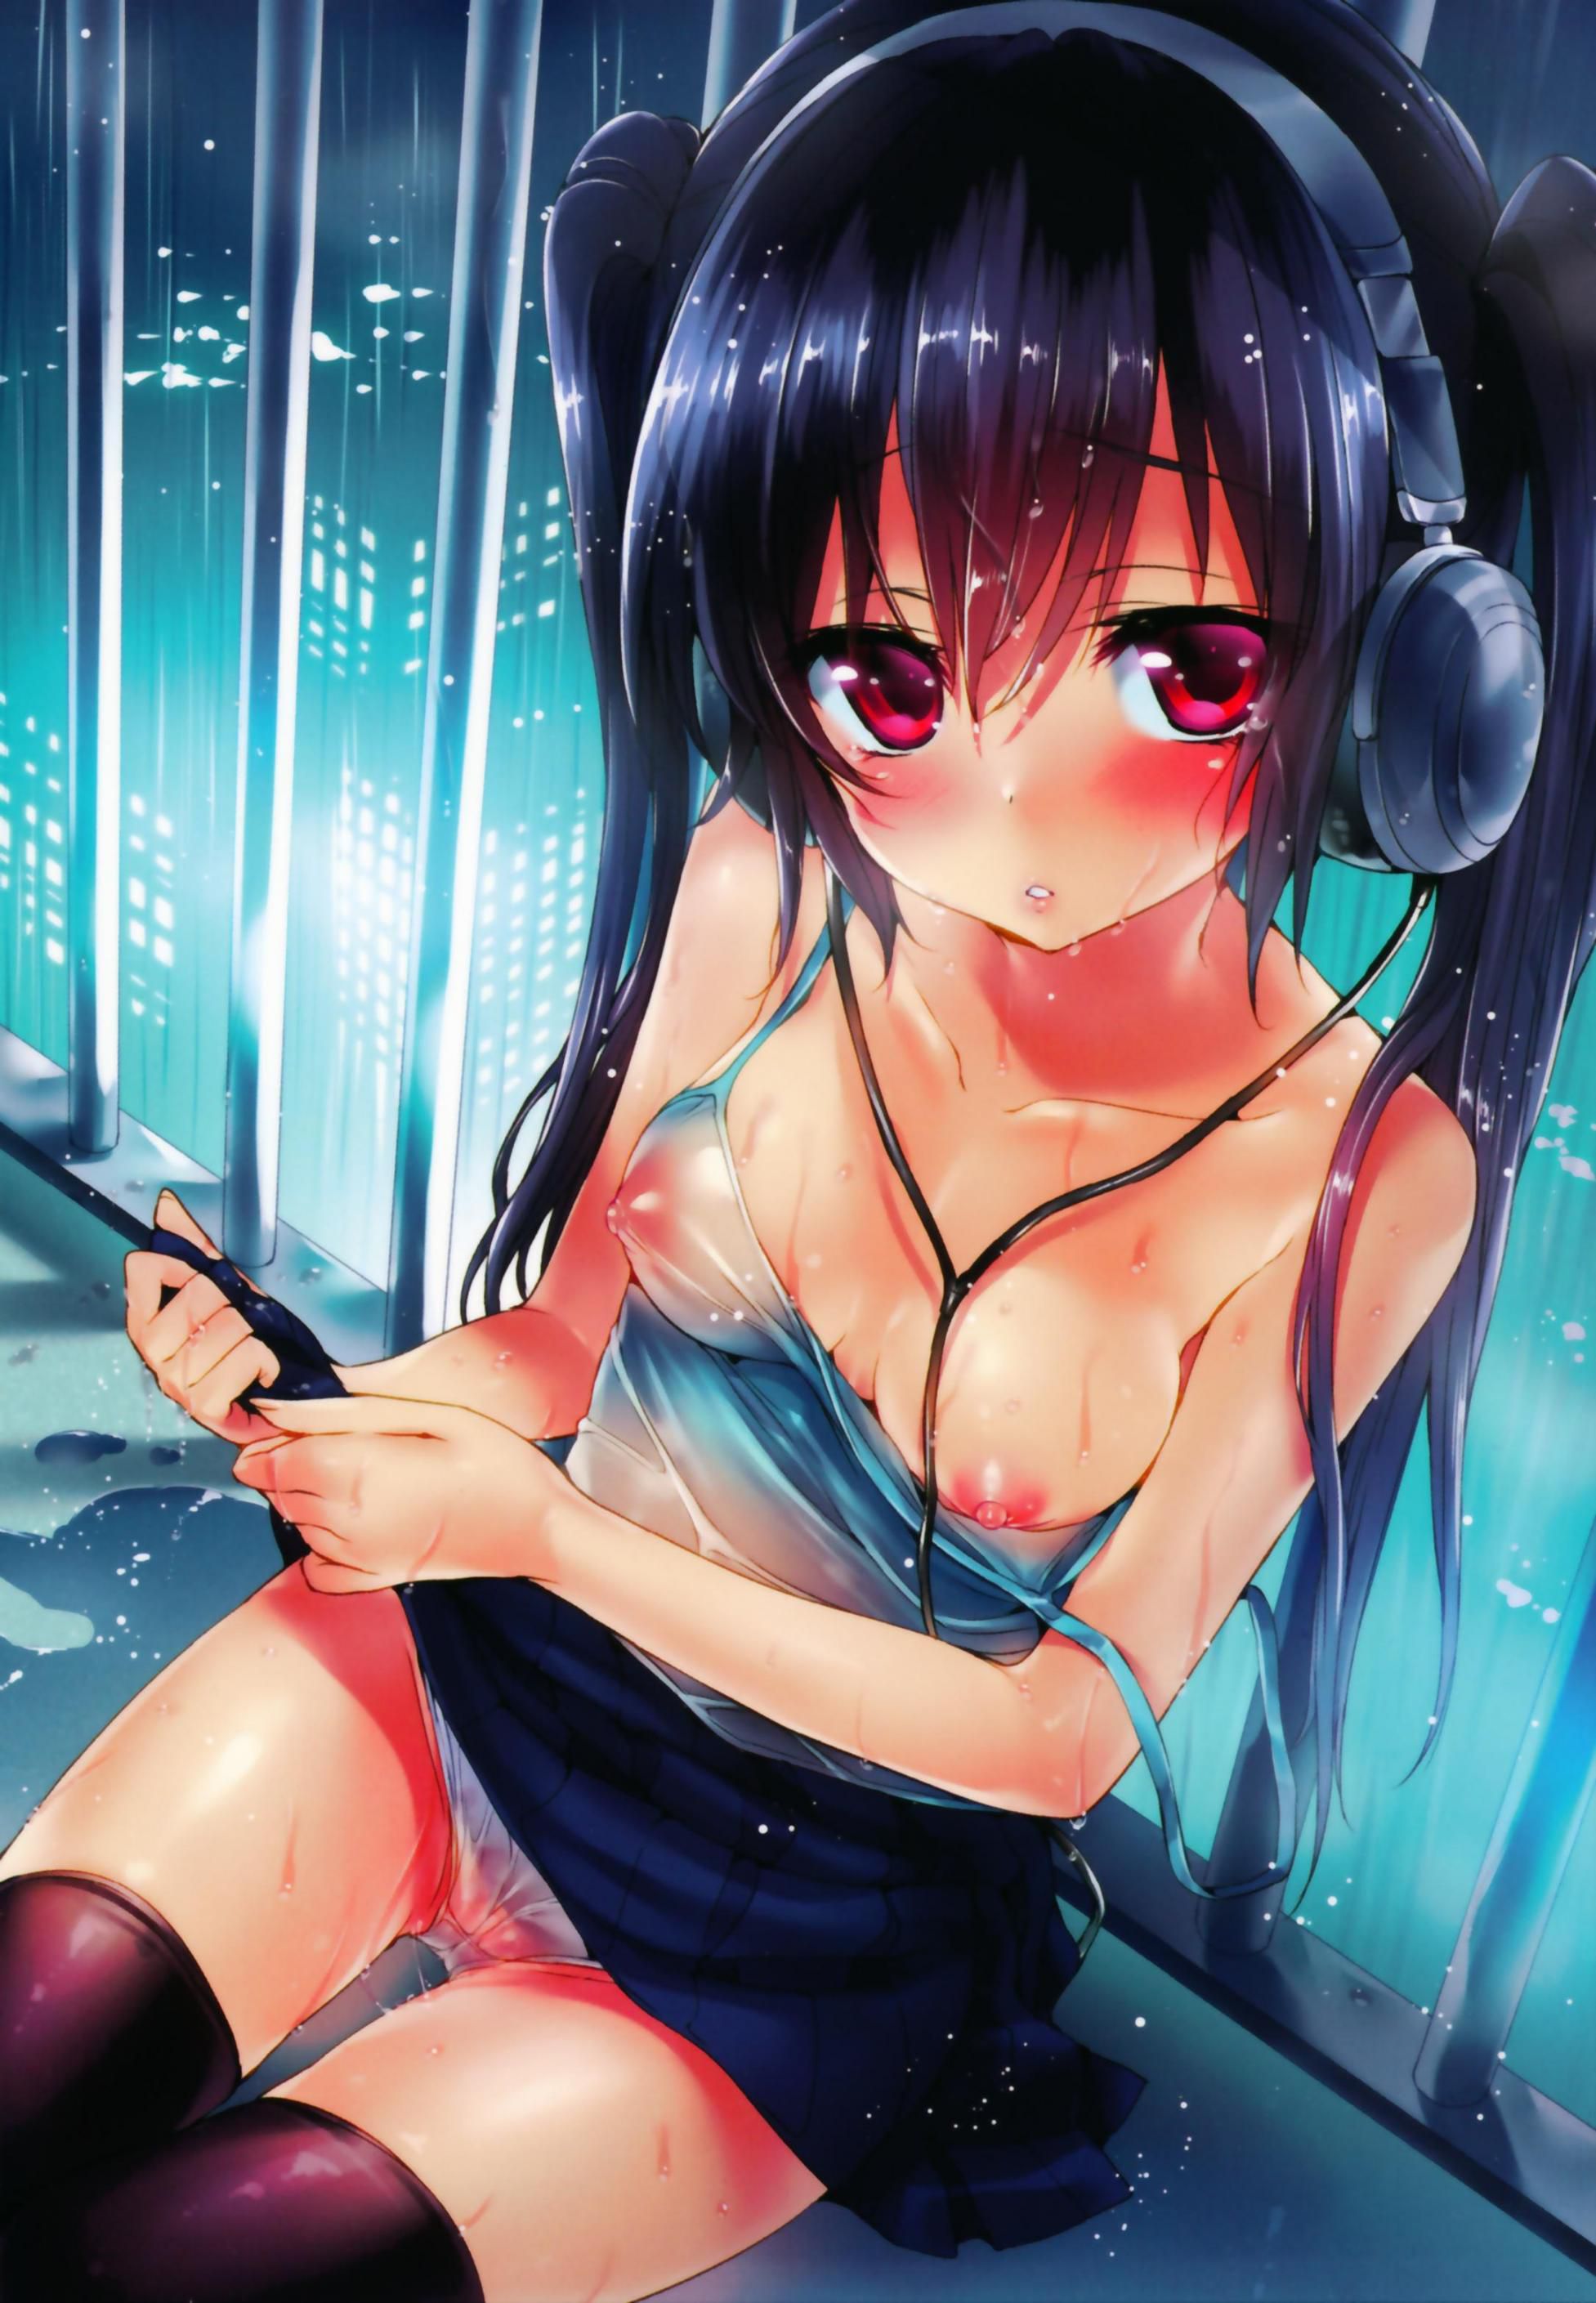 [Secondary] girl I have the headphones (headphones) [images] 31